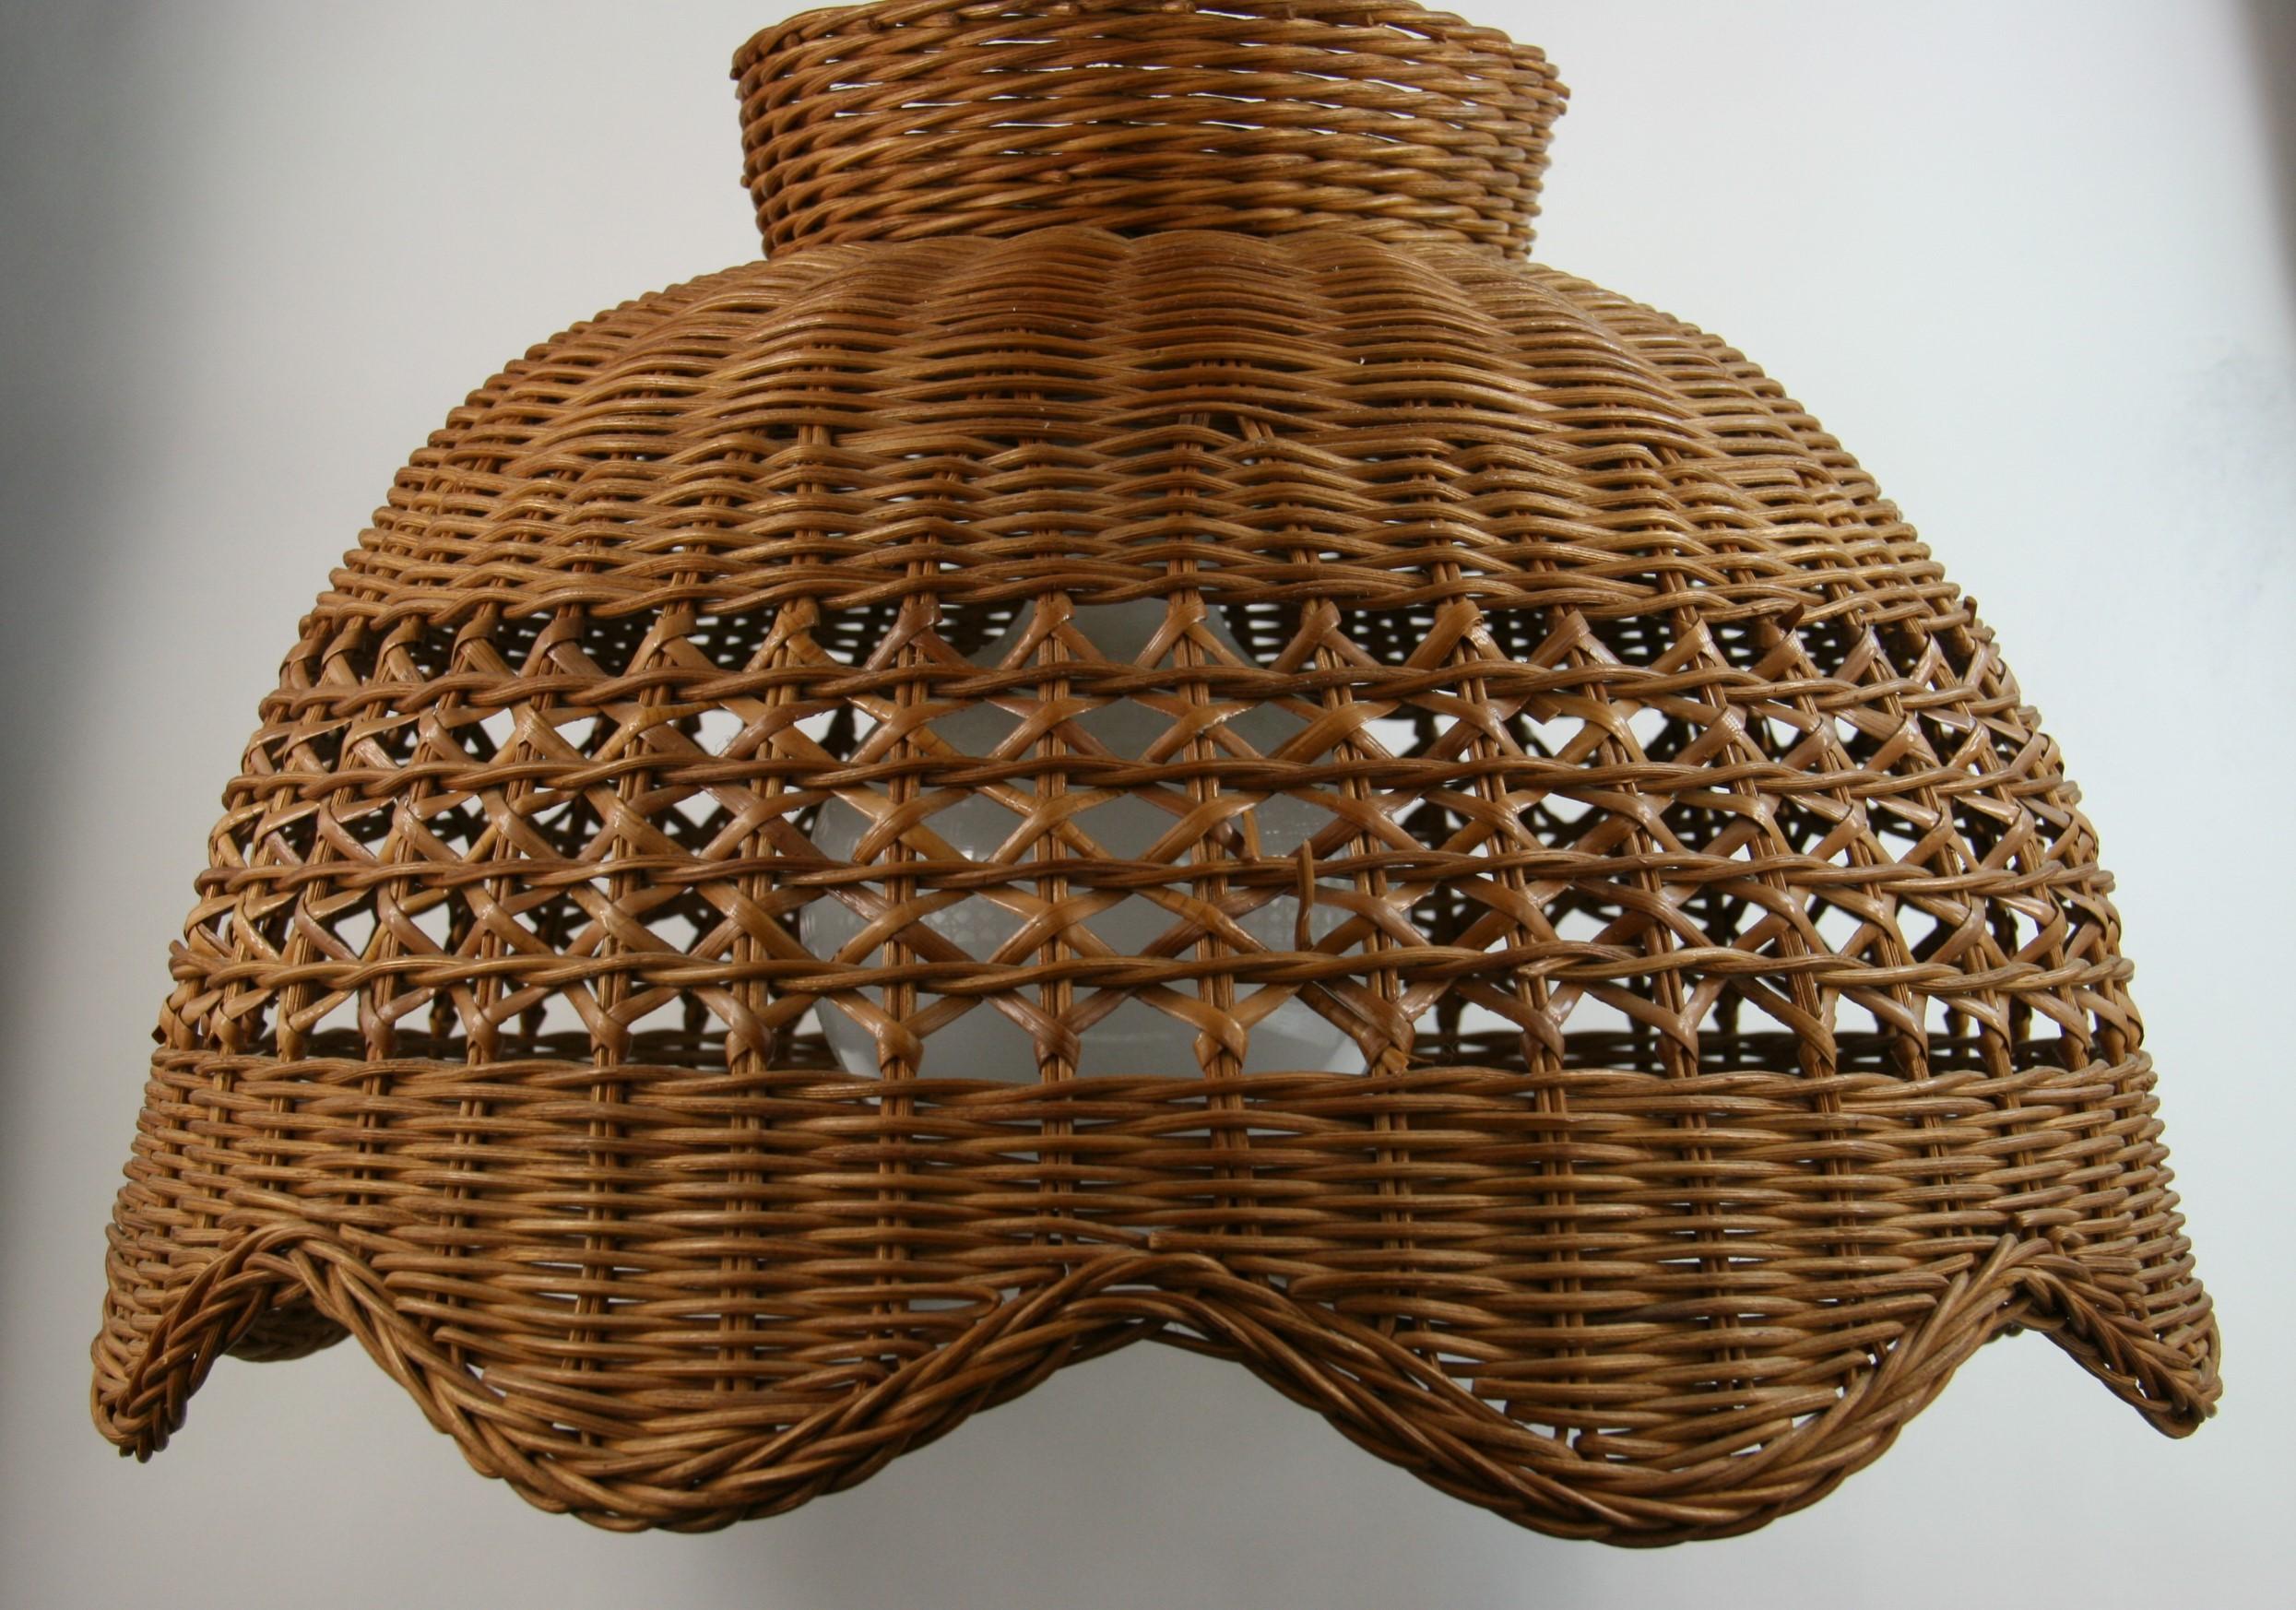 8-276 handwoven rattan  wicker with undulating bottom.
Takes one 100 watt bulb
Supplied with brass chain and canopy
Rewired.